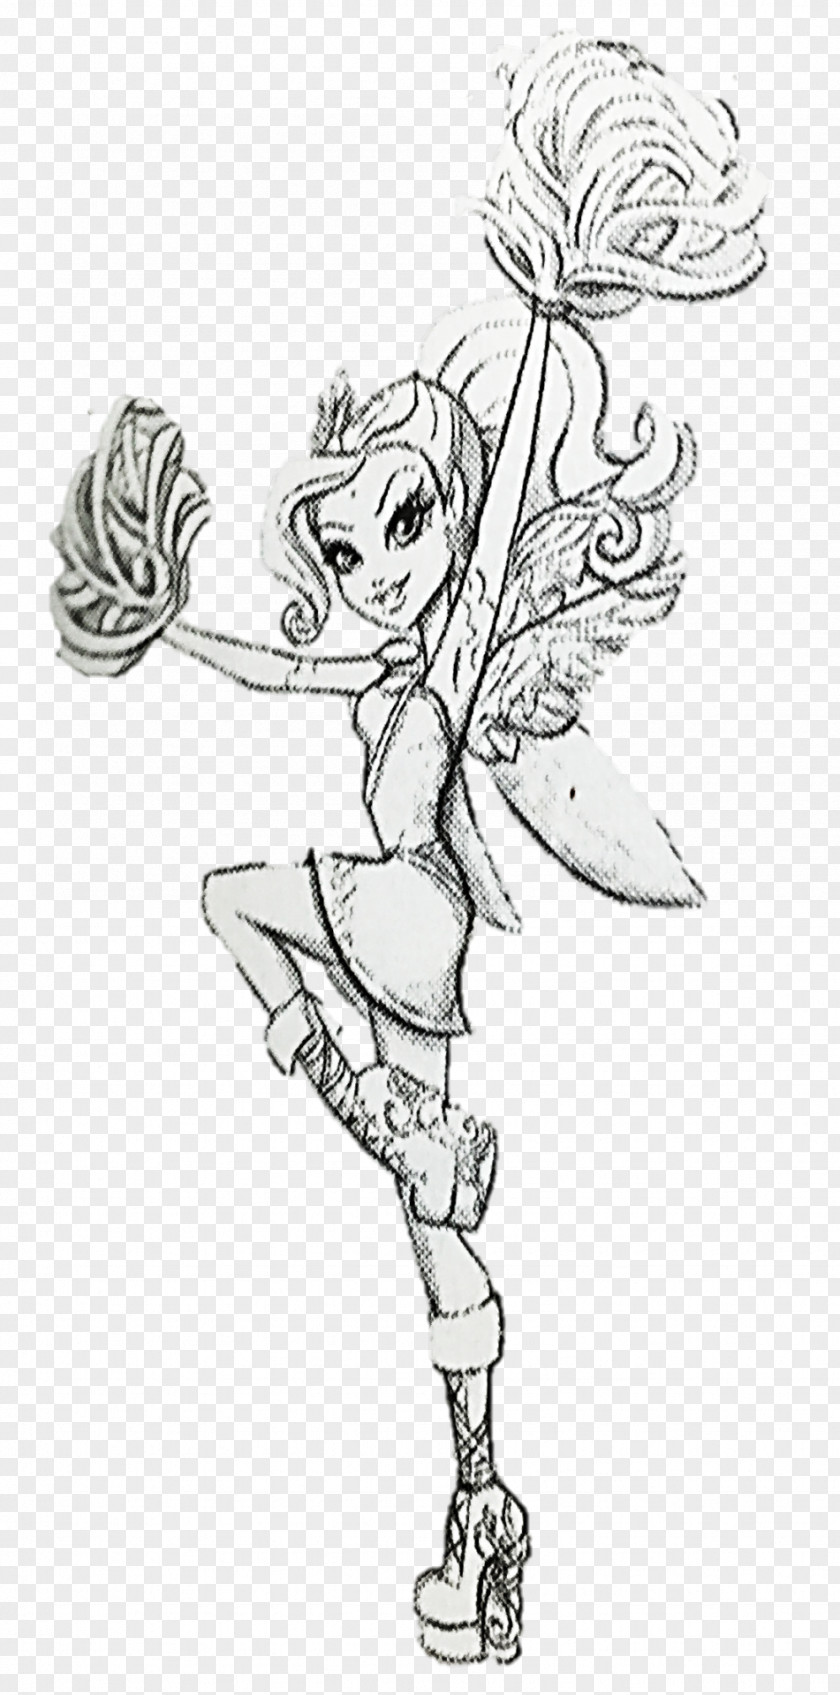 Sleeping Beauty Ever After High Rapunzel Cheshire Cat Fairy Godmother Sketch PNG